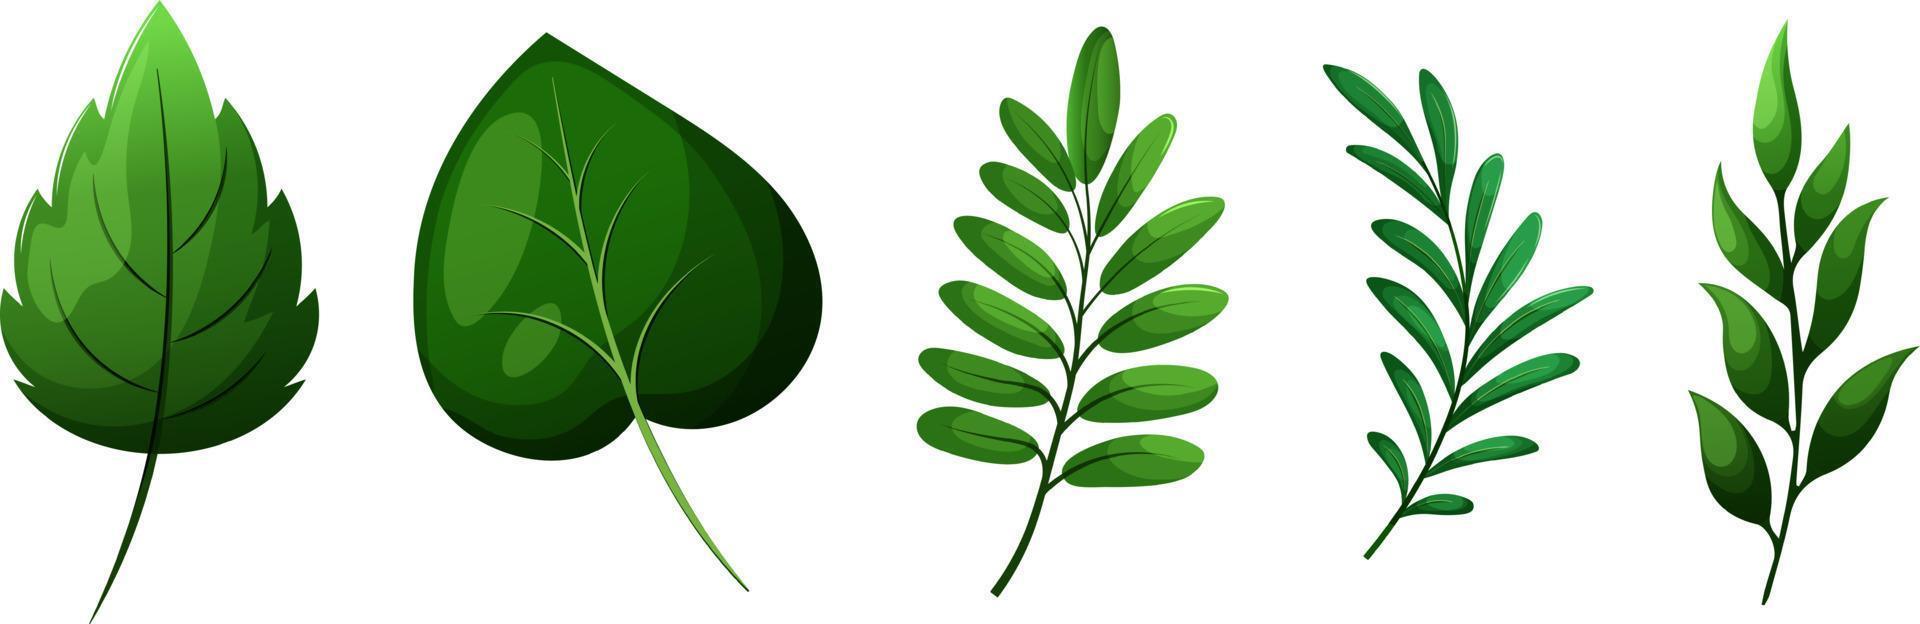 Set of cartoon green leaves and branches on transparent background vector